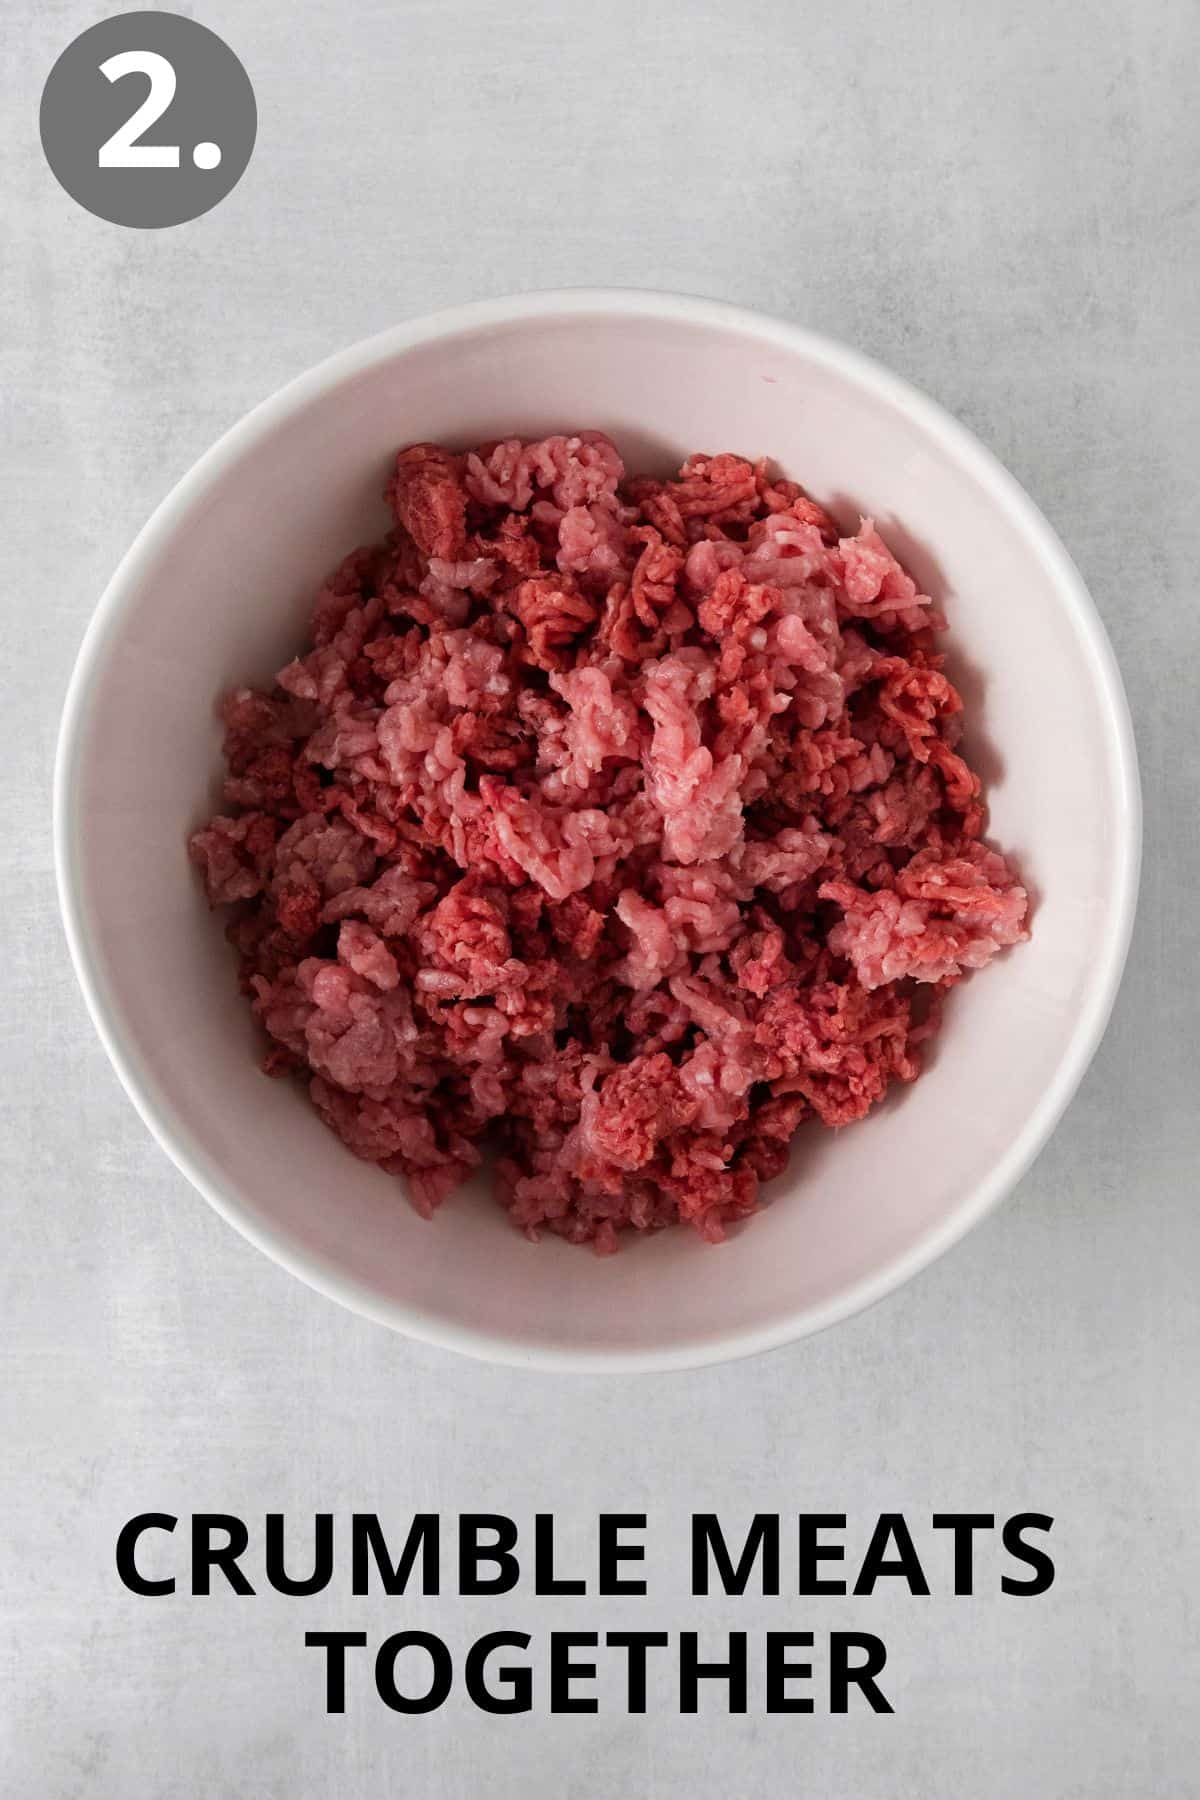 Meats crumbled in a bowl together